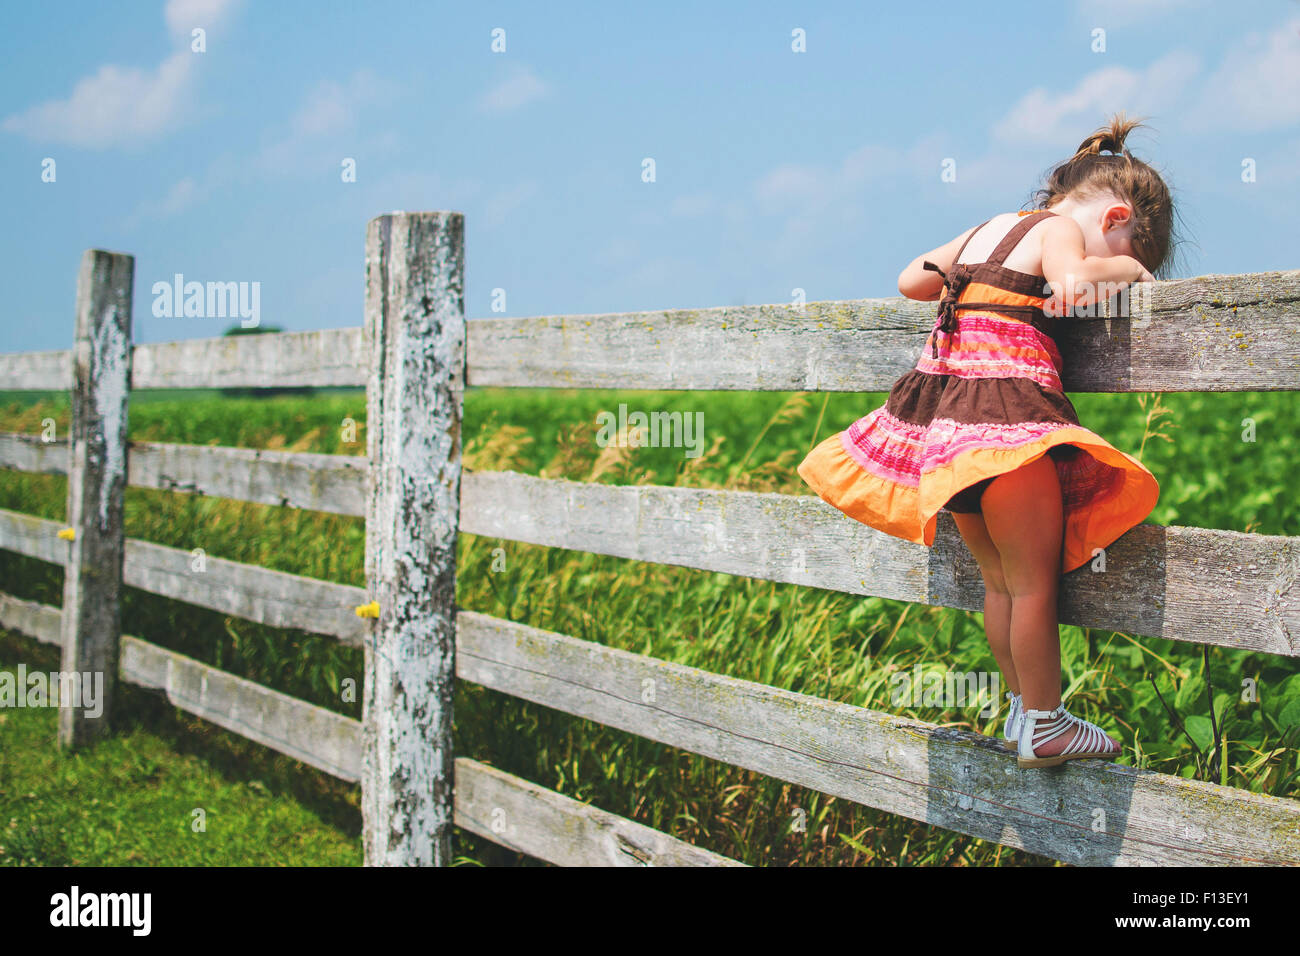 Side view of a girl standing on a fence looking down Stock Photo